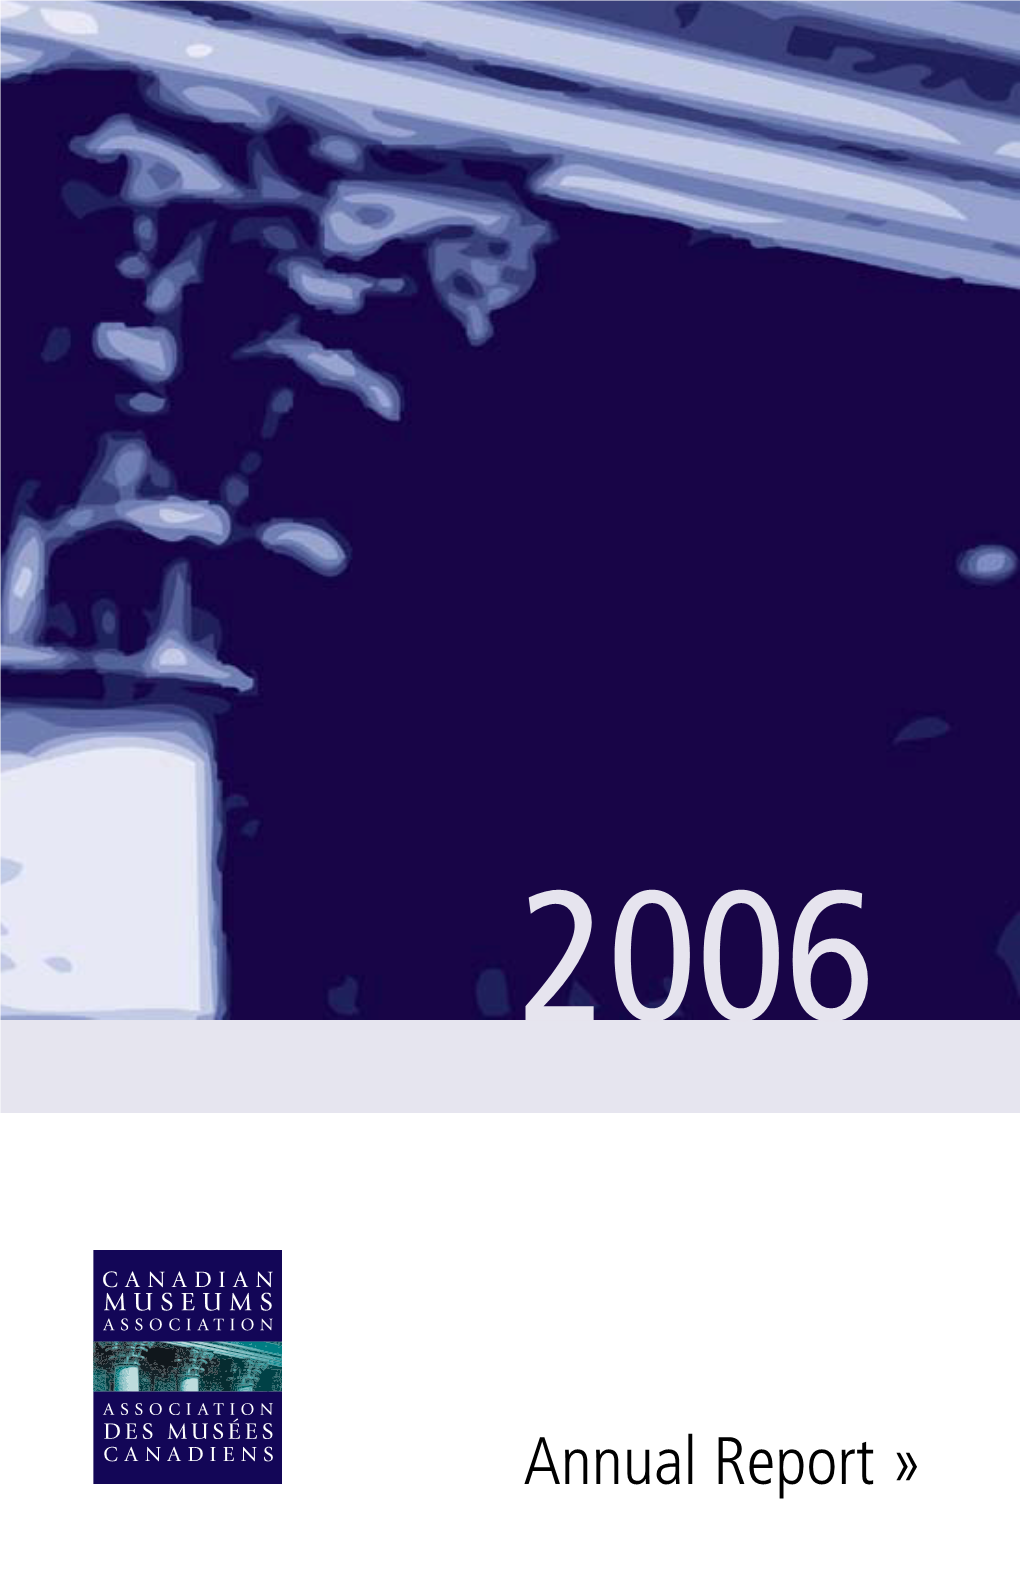 Annual Report » Canadian Museums Association Annual Report 2006